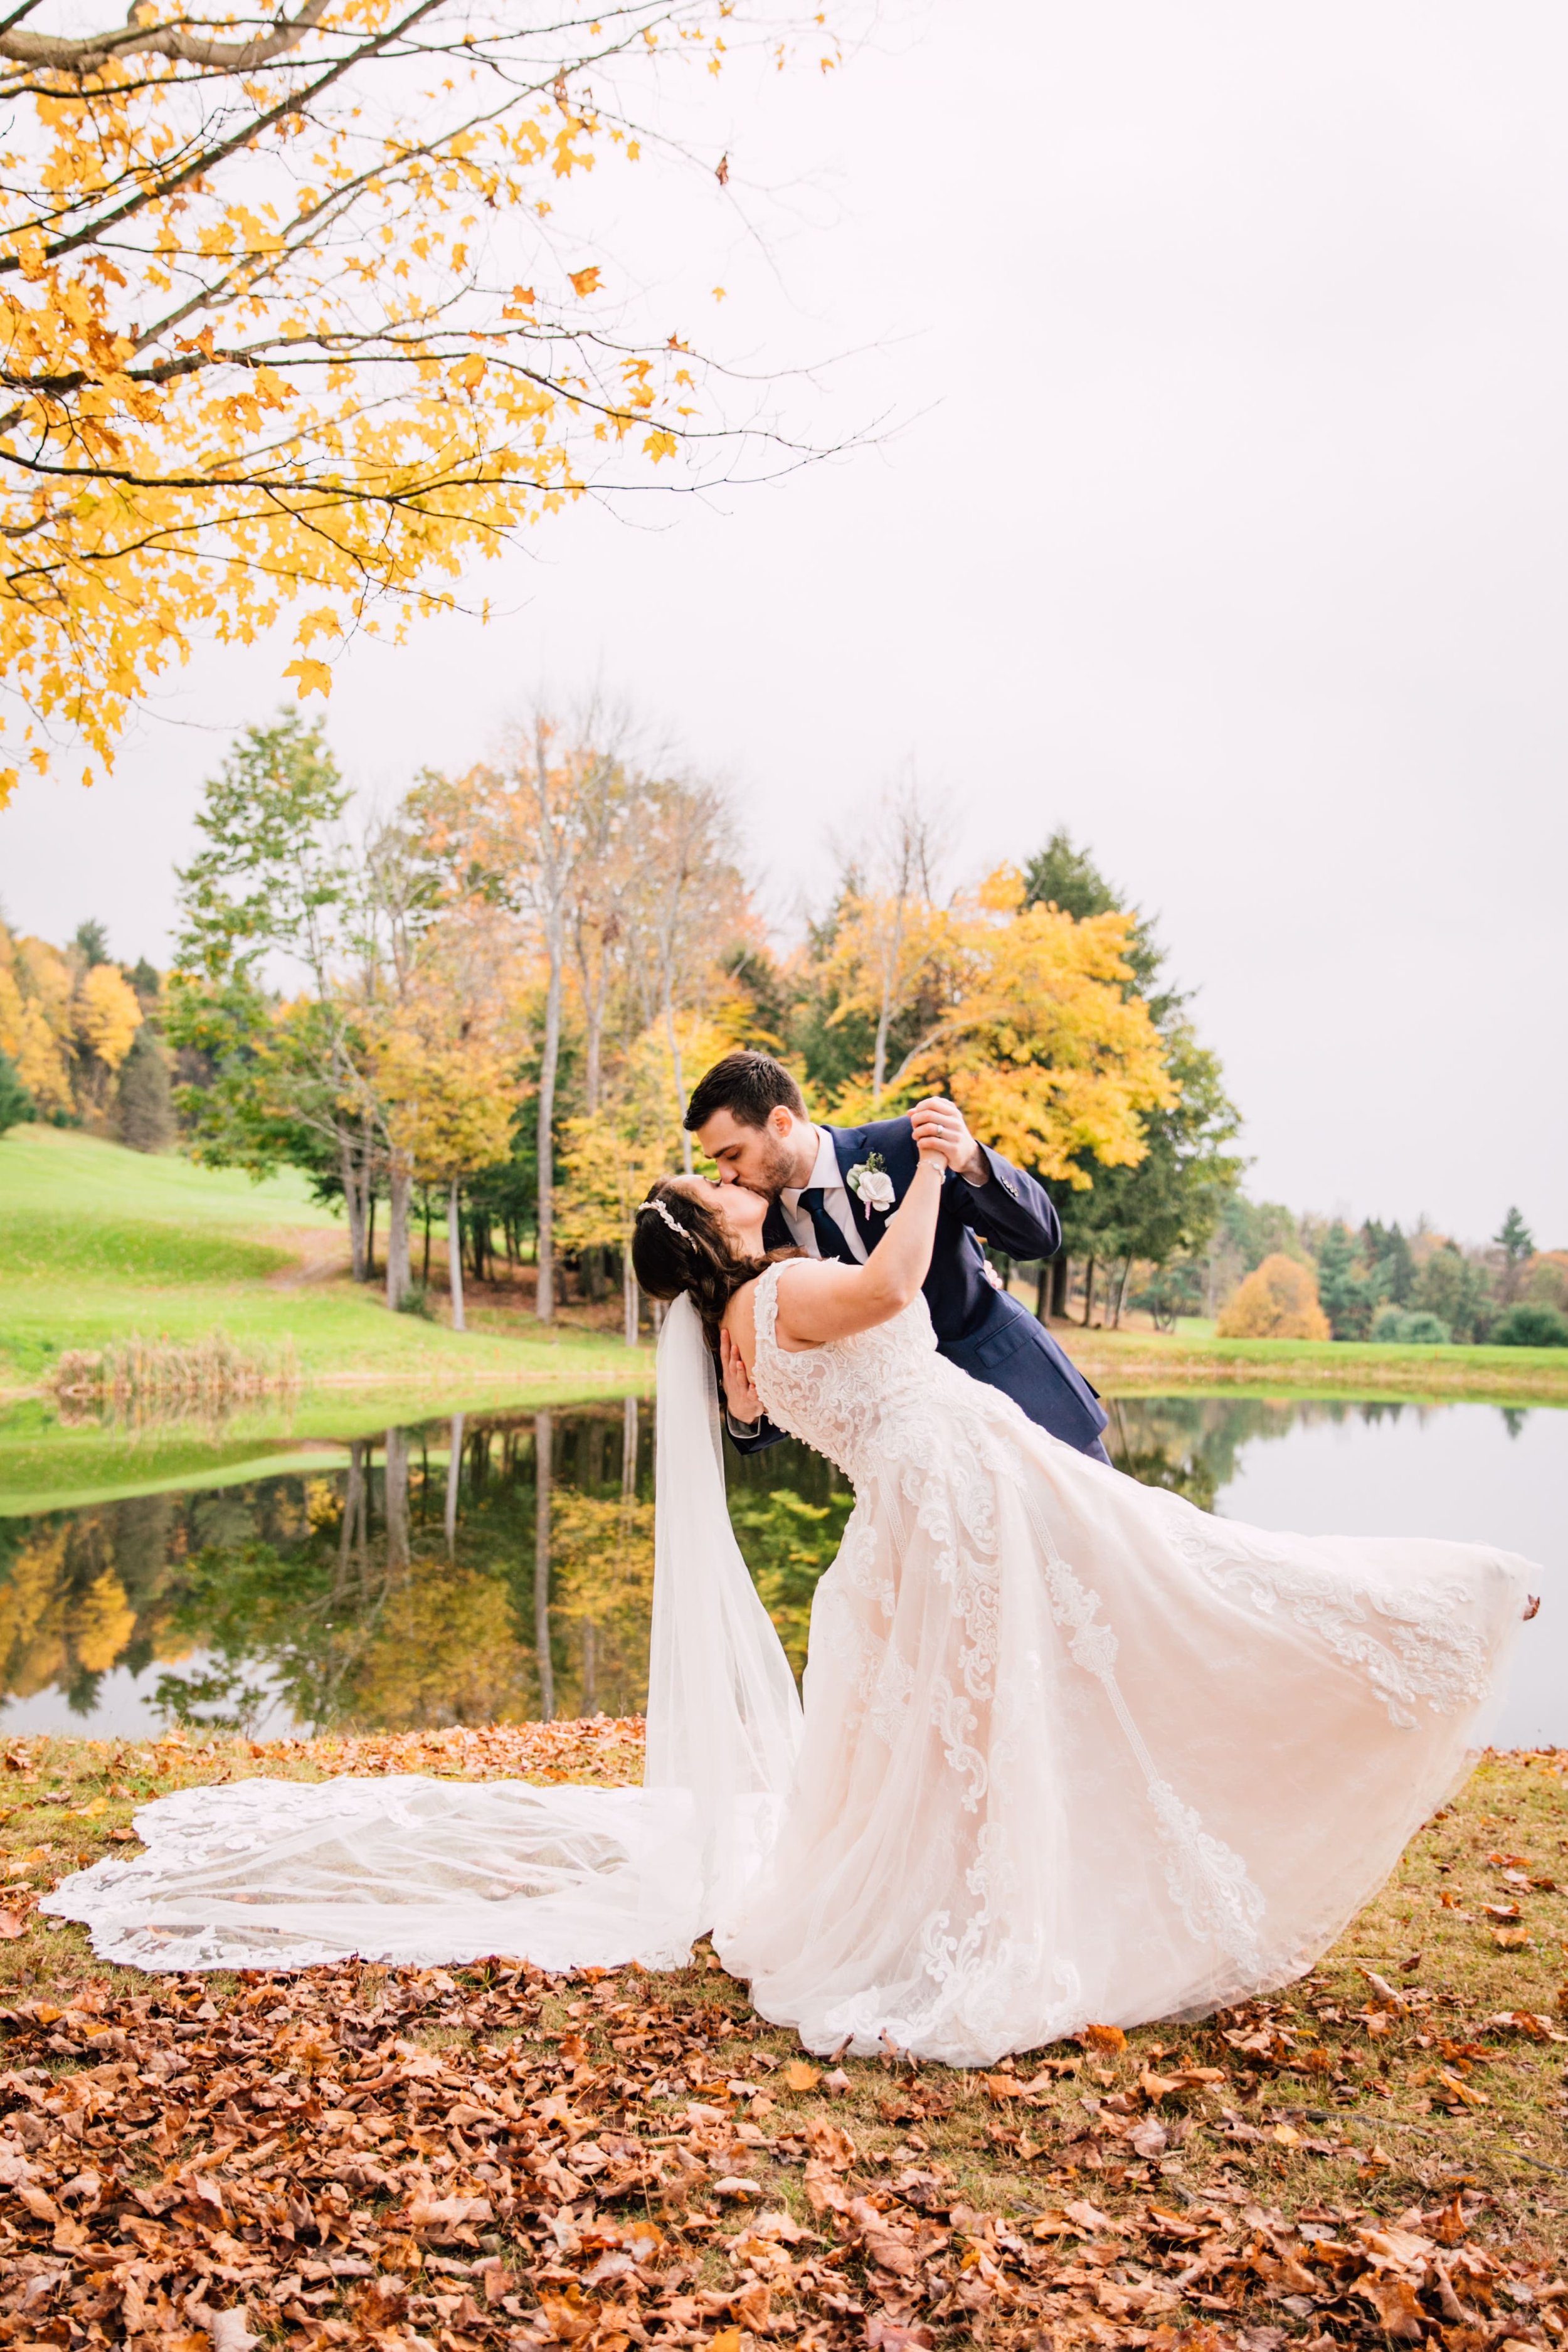  the groom dips the bride as they dance in front of a pond and kiss while taking fall wedding photos 